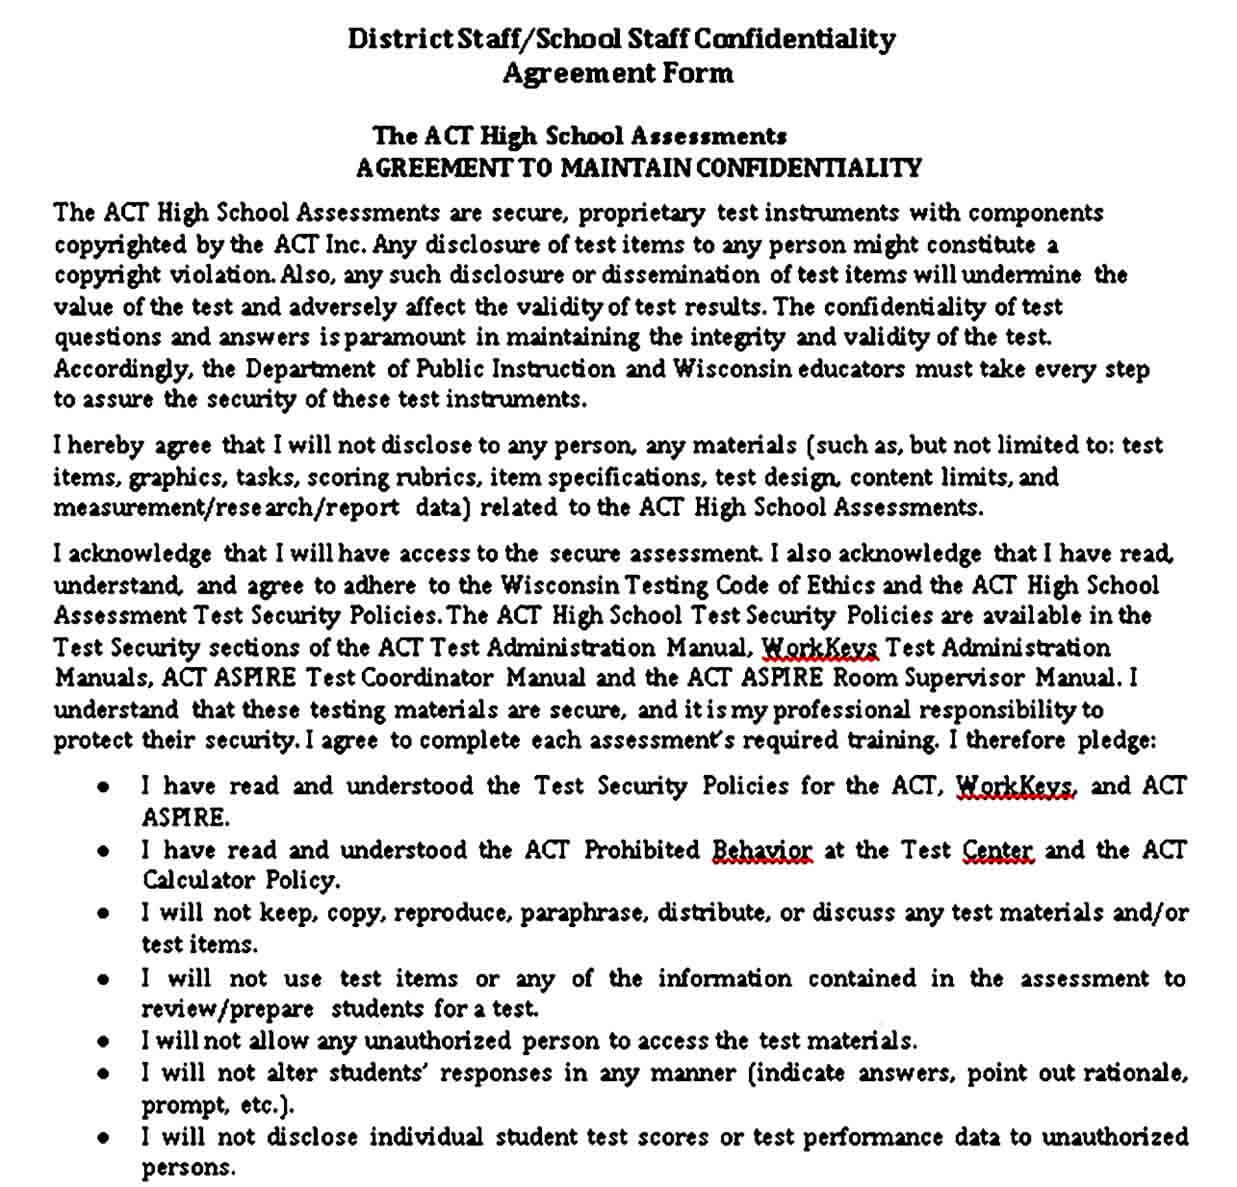 District School staff confidentiality Agreement form